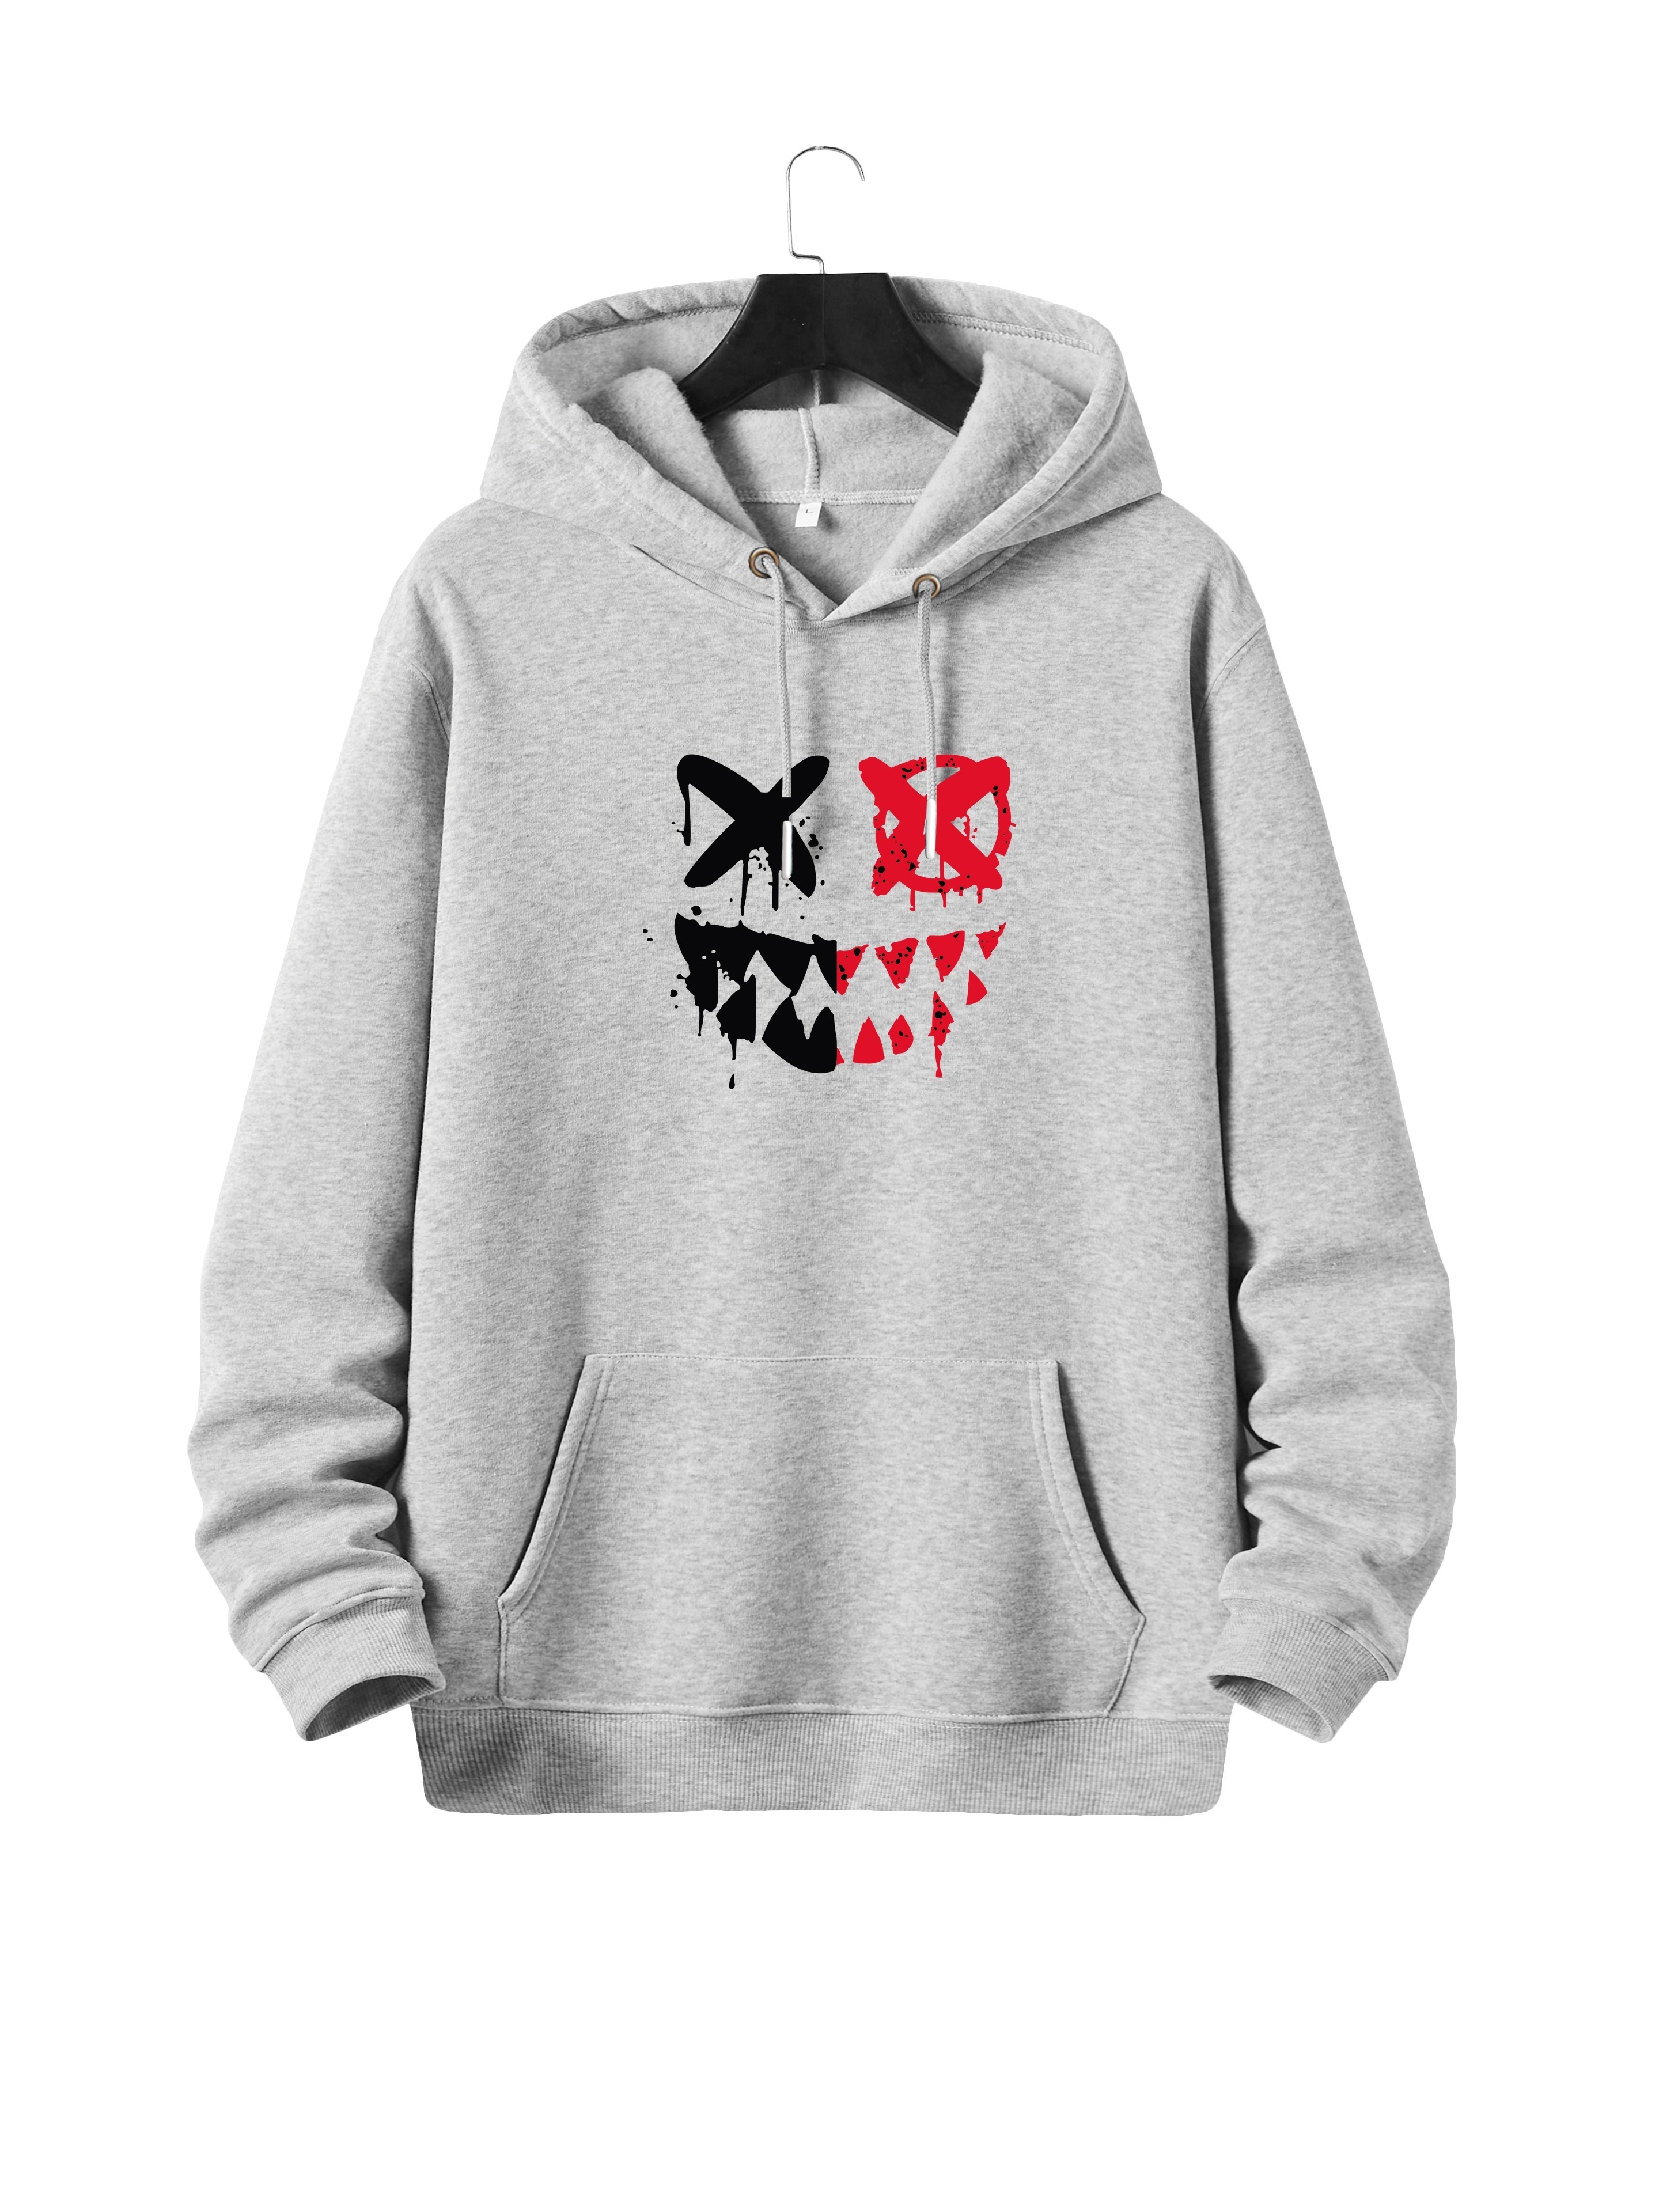 Men's Tall Pullover Hoodie Bright White